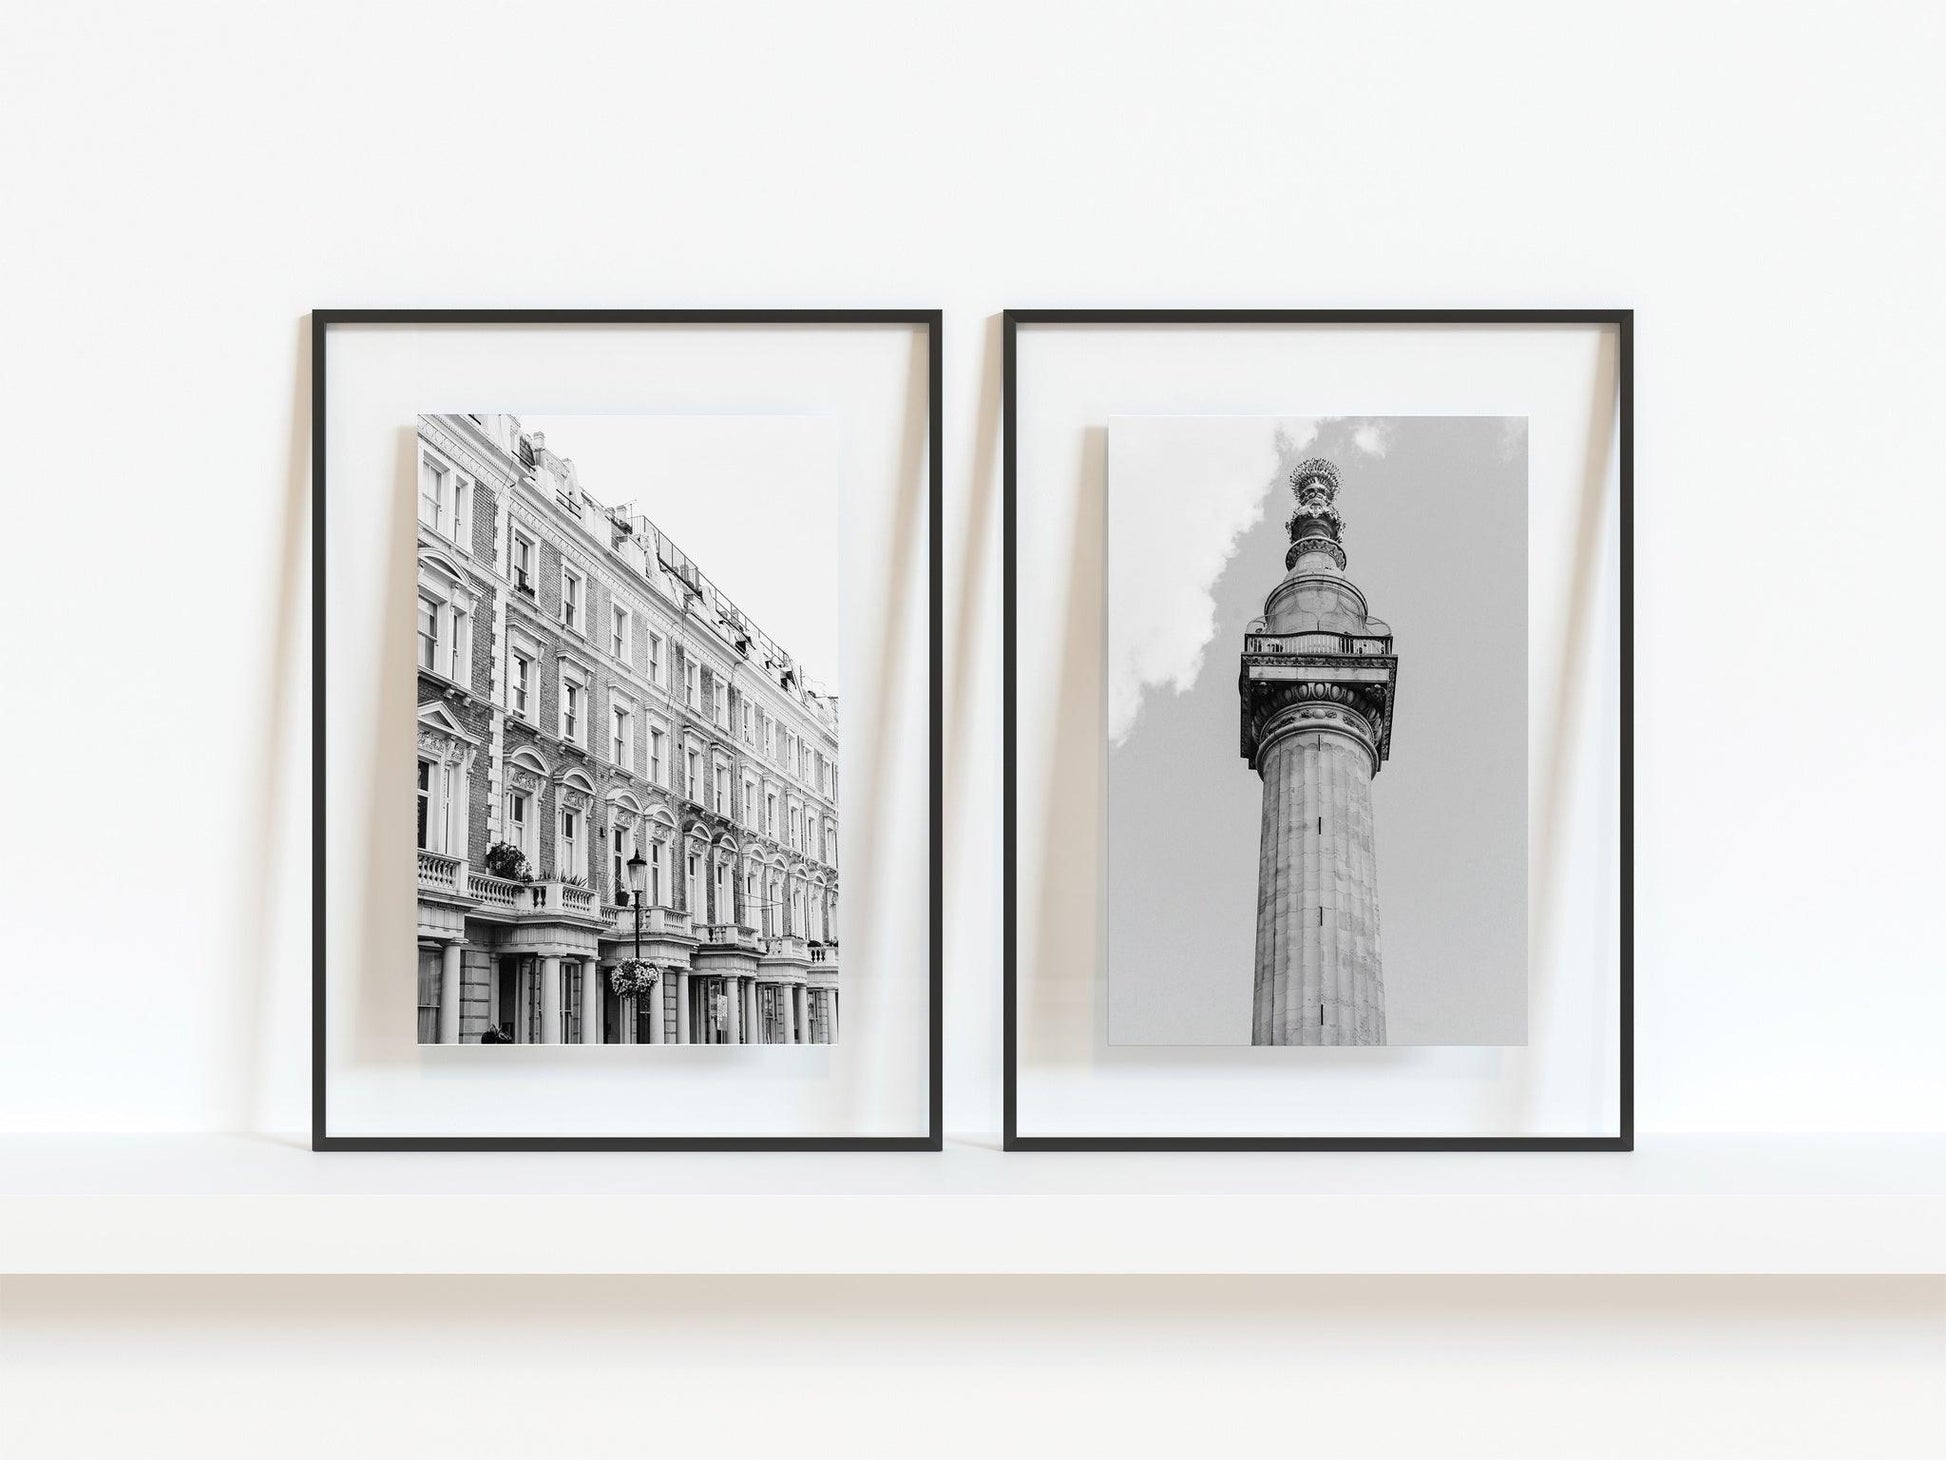 black and white prints of london landmarks and monuments. London gallery wall. London photos for gallery wall. Affordable london travel prints. travel london london home london interiors photography london london photography beautiful places travel prints london design london pictures london city london photography london art london photography vintage london calling travel photography travel photos